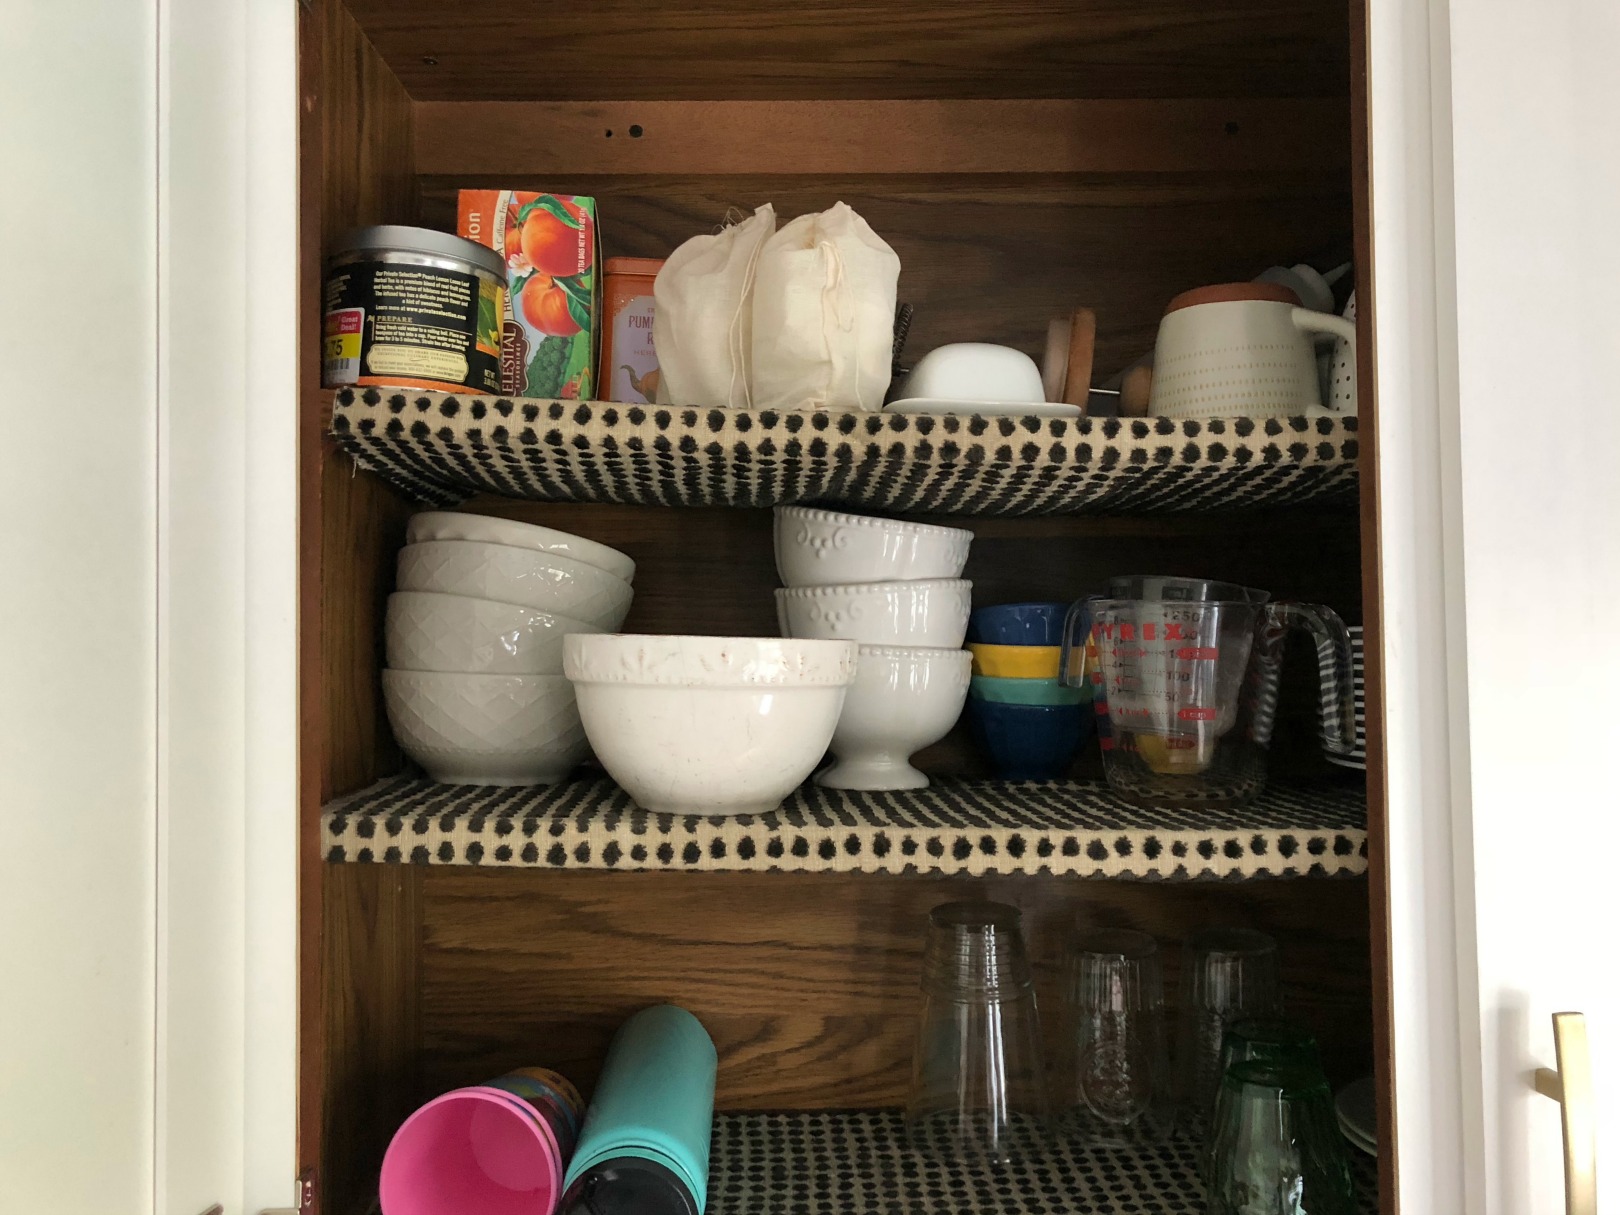 BEFORE Kitchen Organizing Tips - Small Space Living